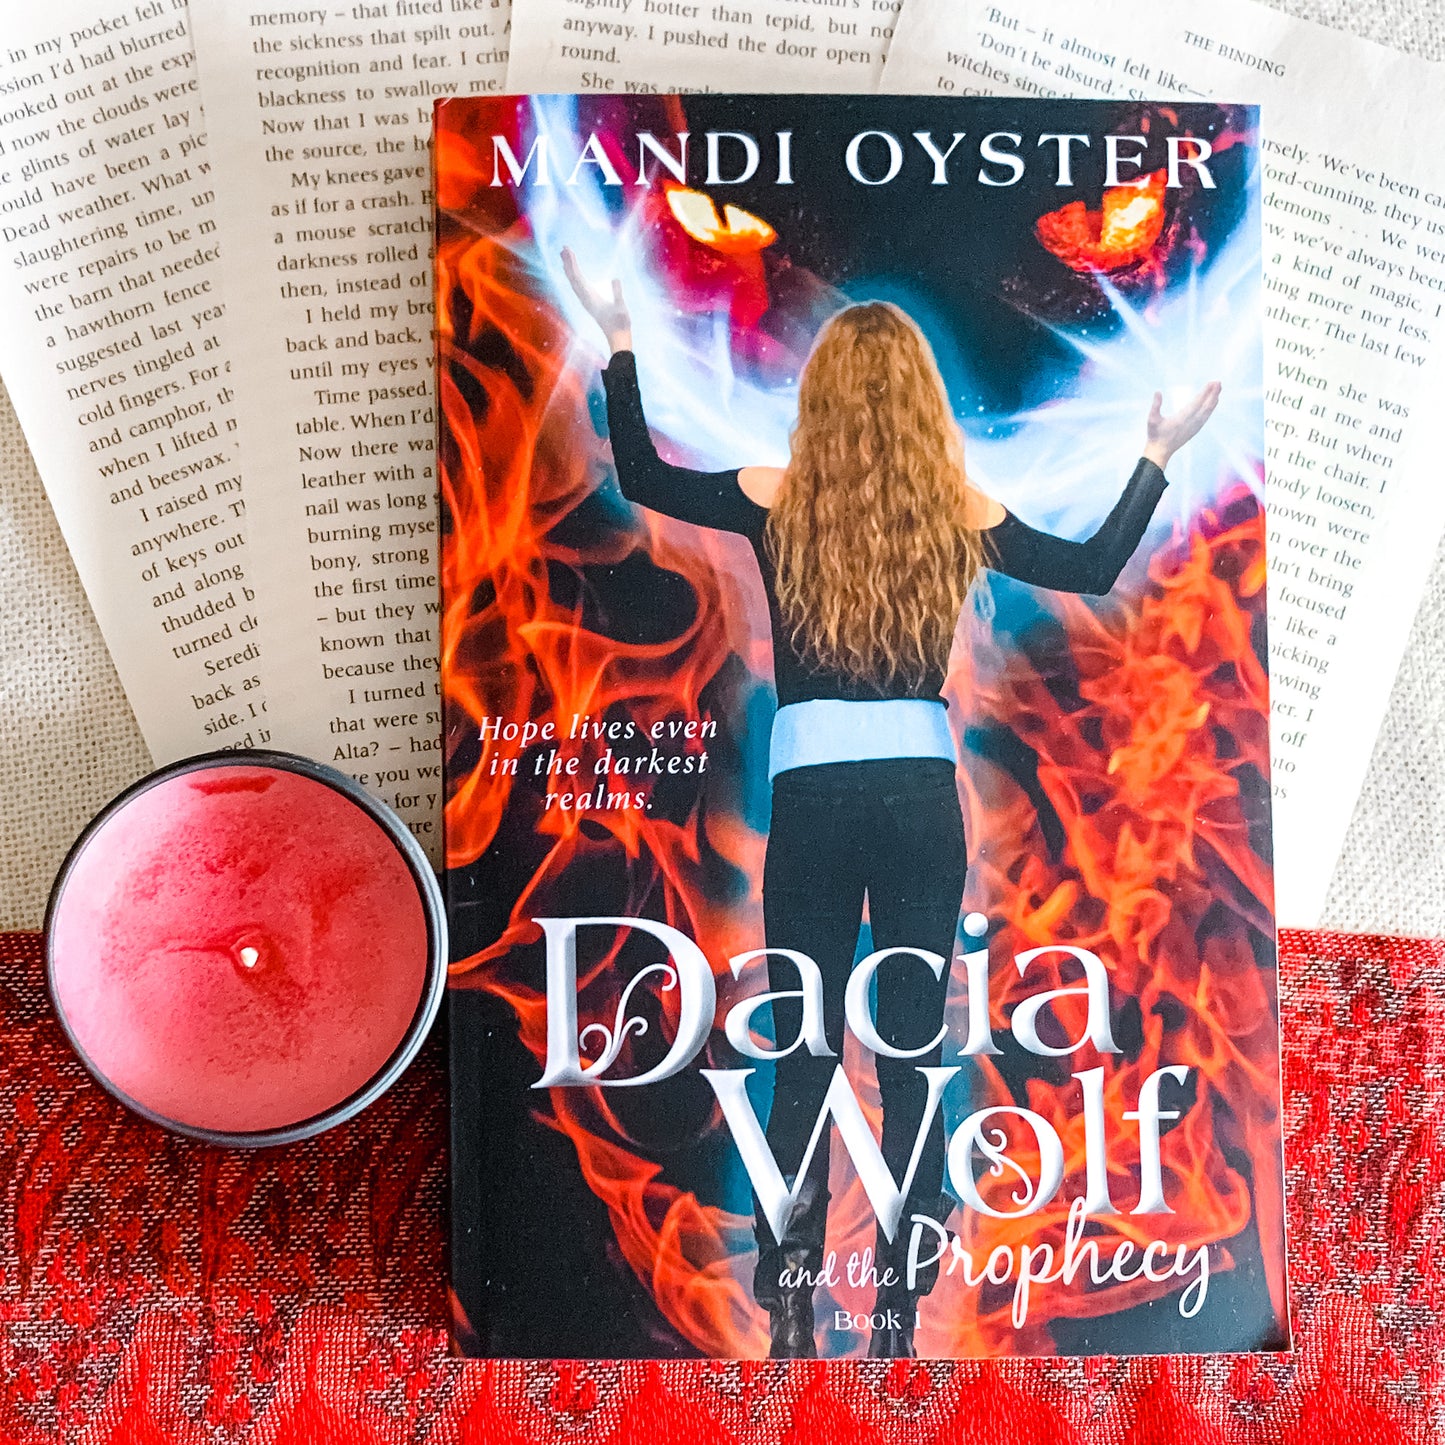 Dacia Wolf & the Prophecy by Mandi Oyster